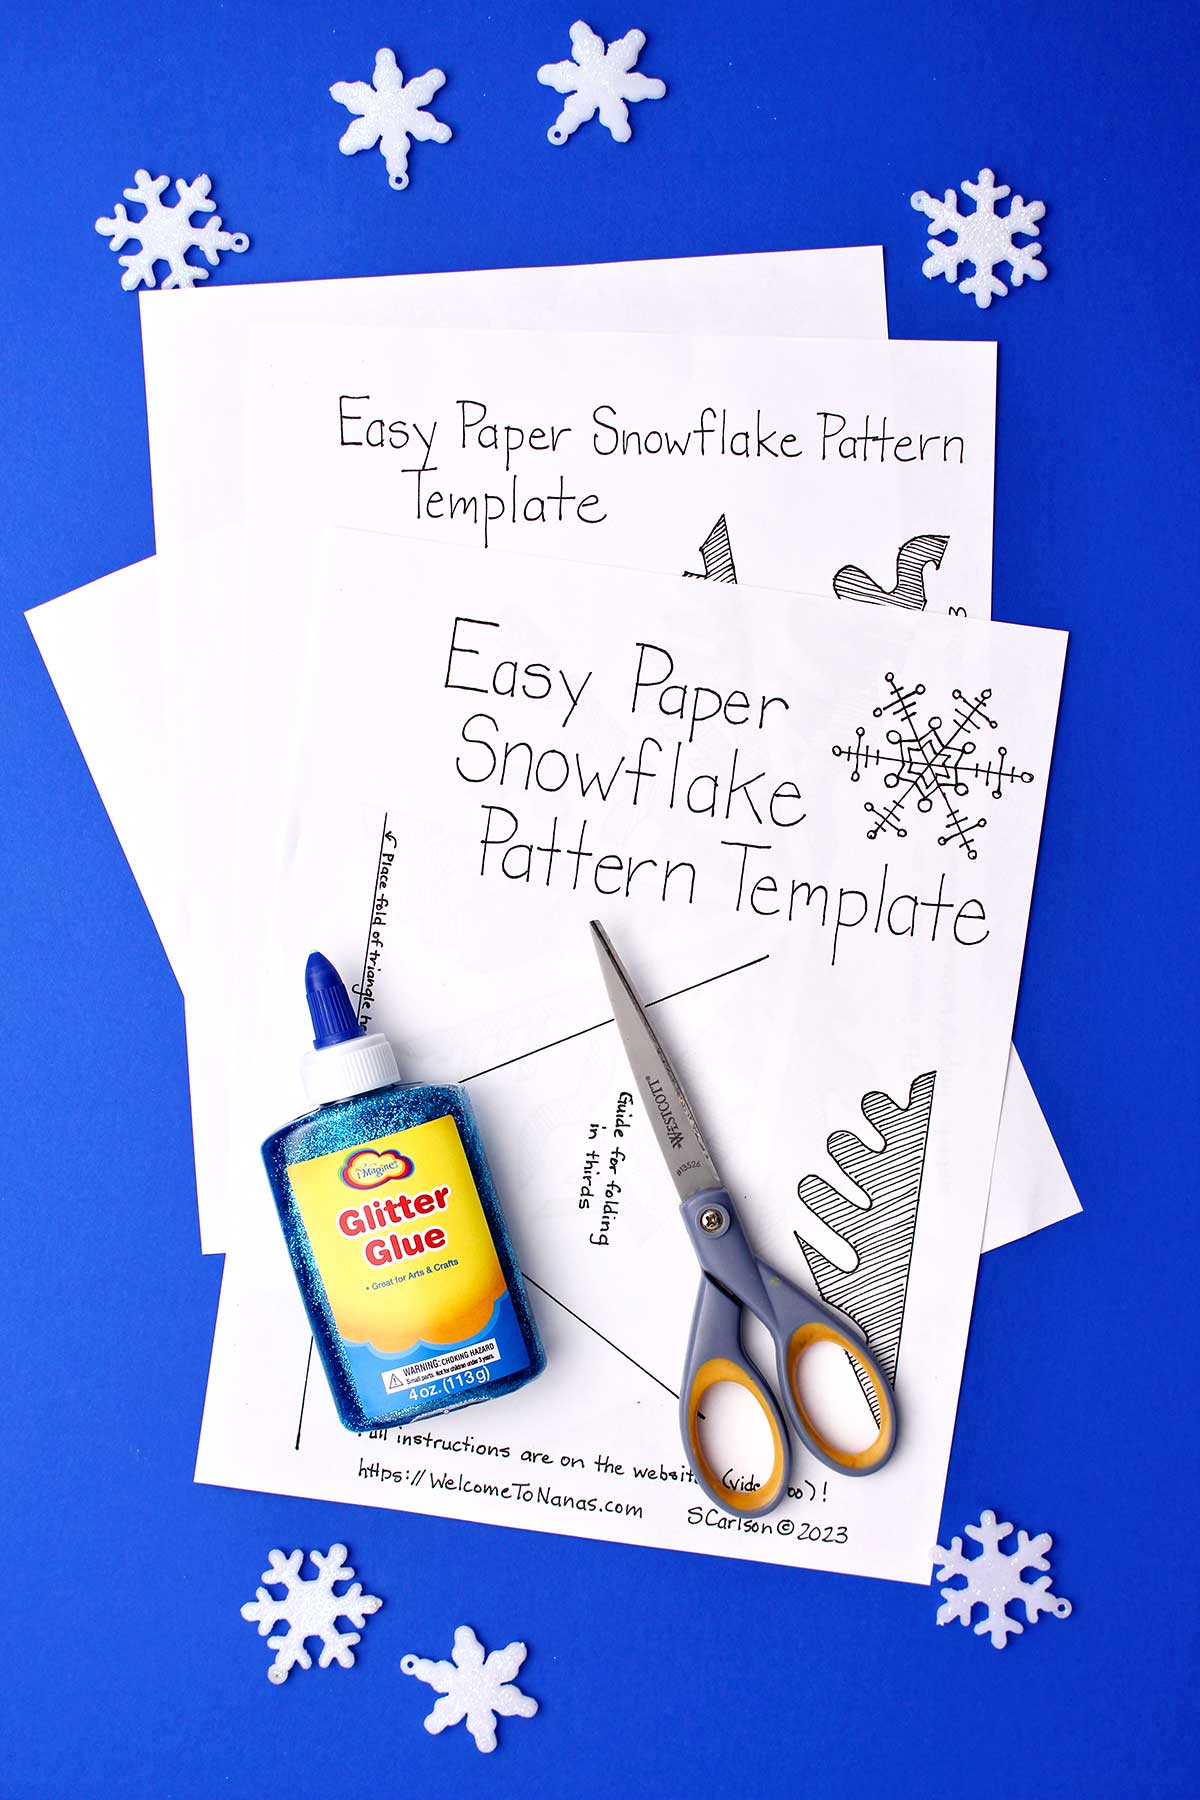 Easy Paper Snowflake Pattern Template, blue glitter glue and scissors on a blue background.